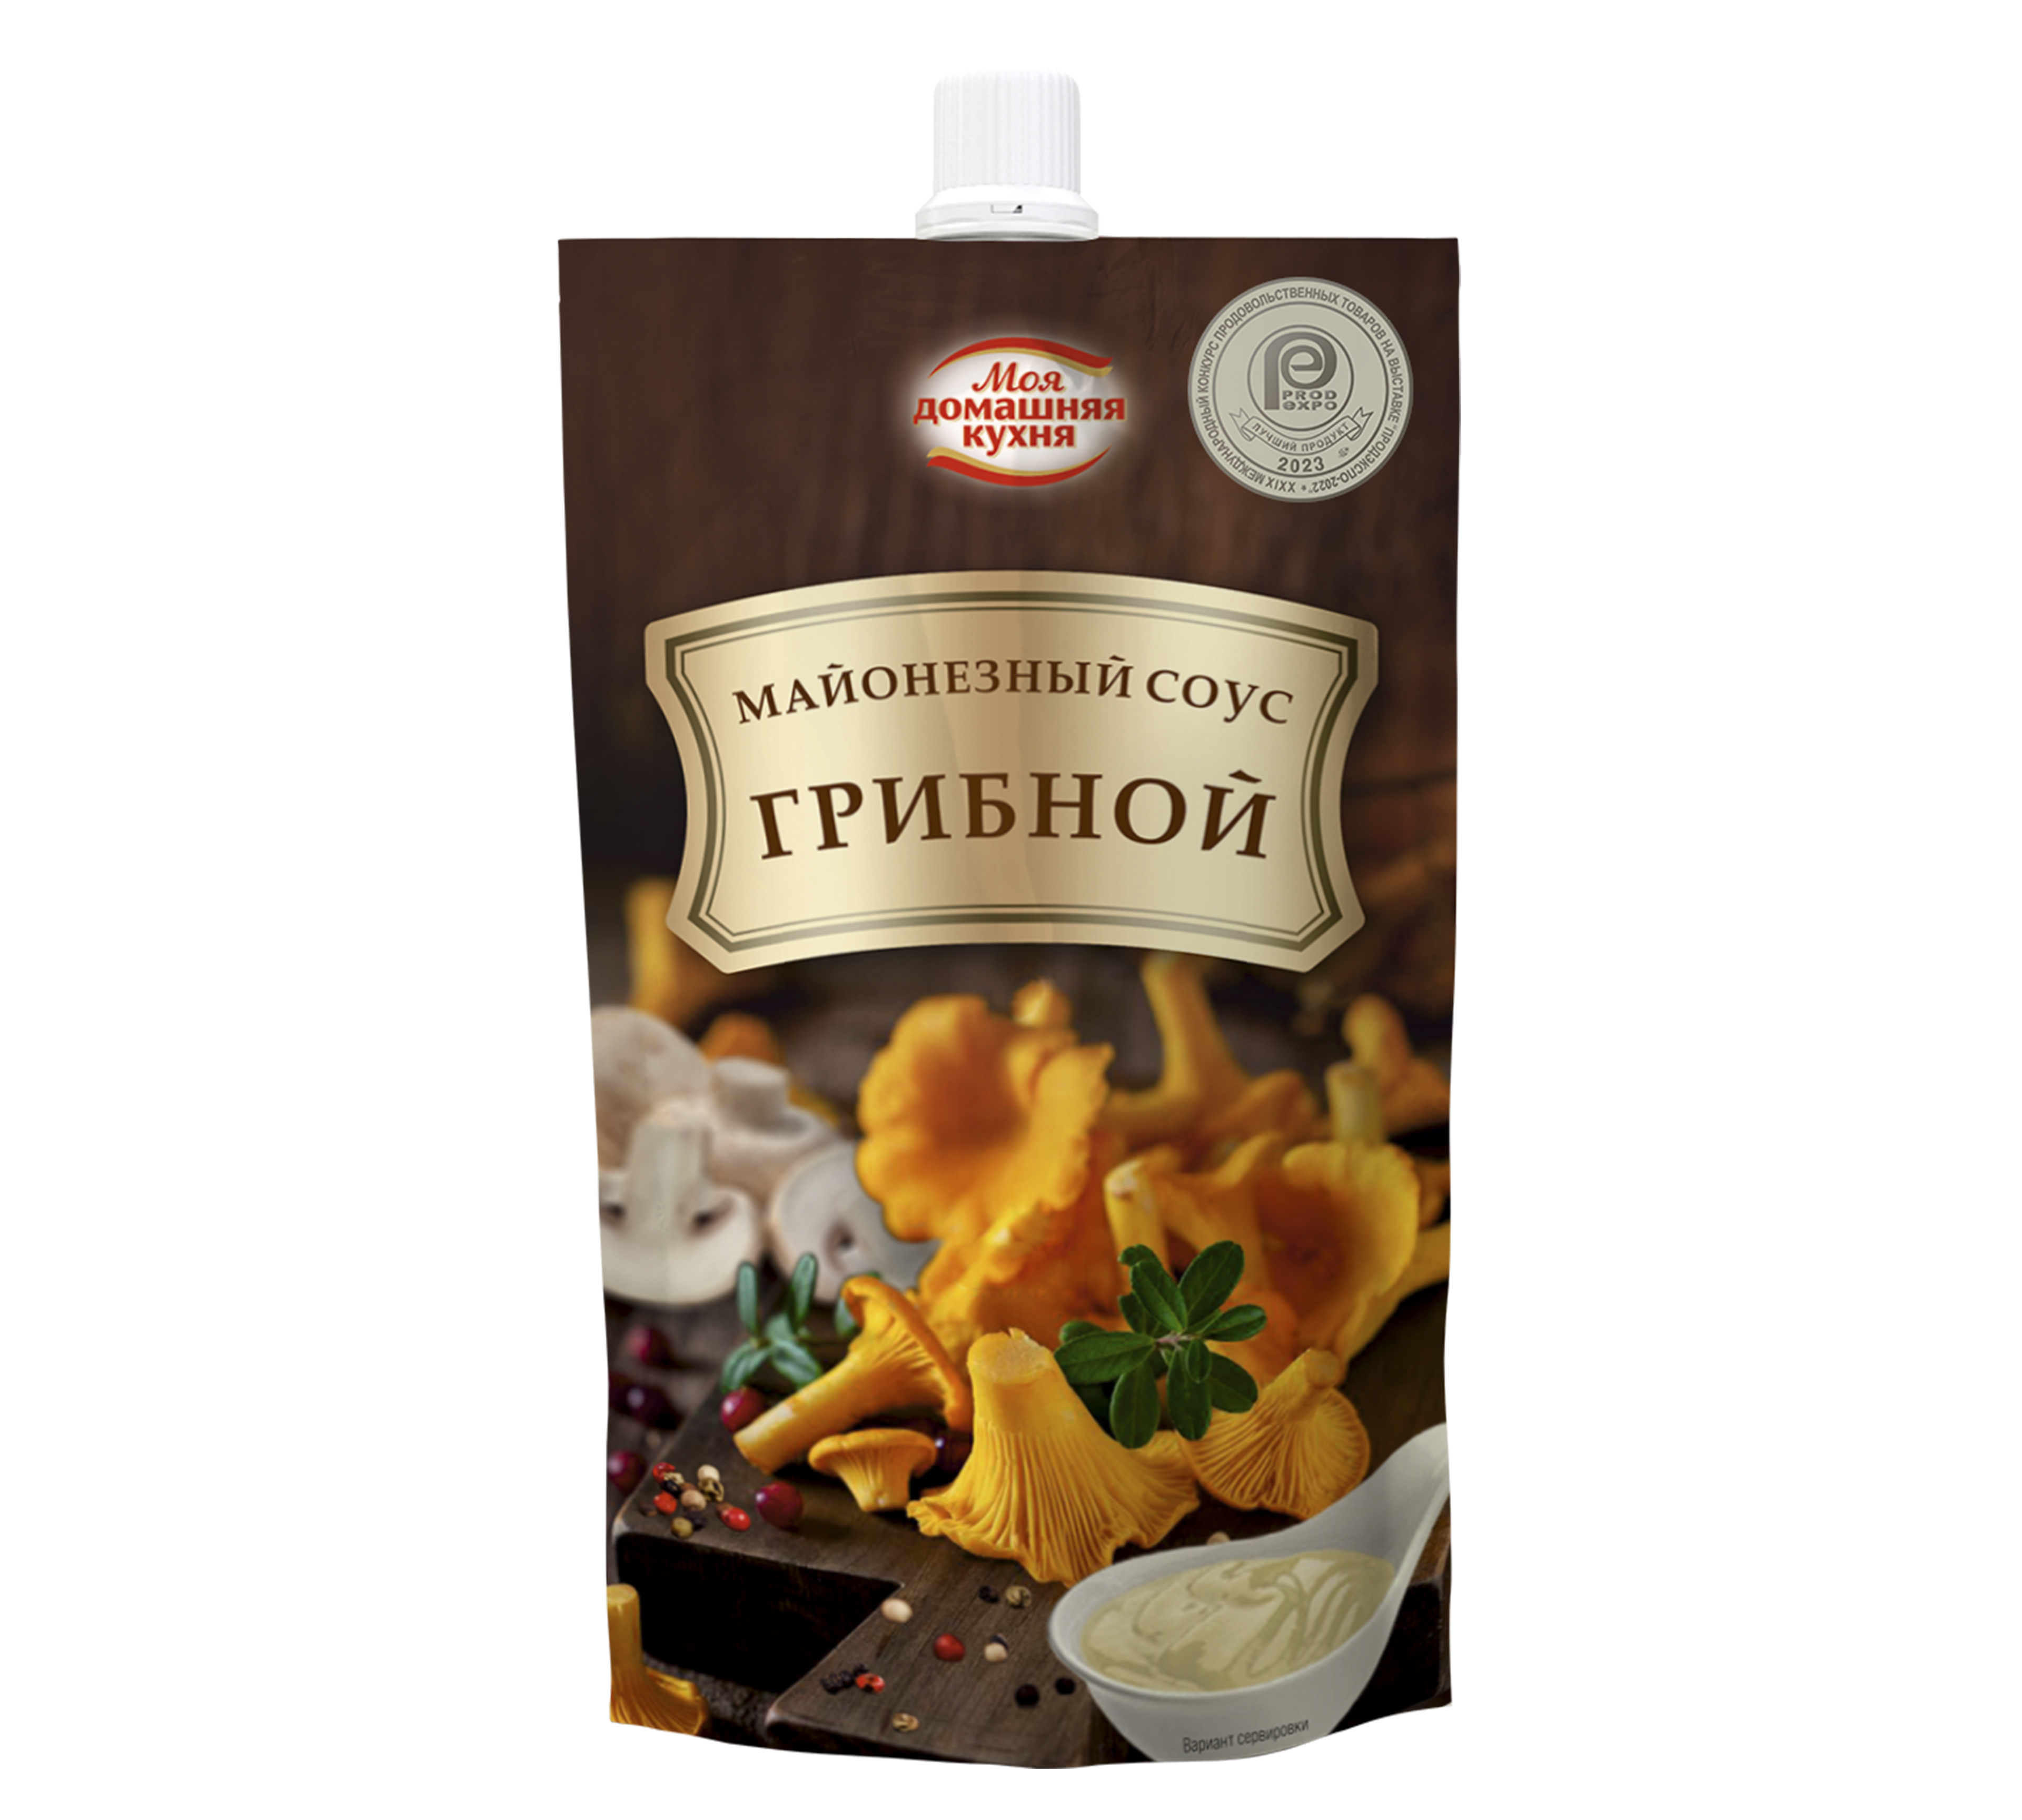 Mayonnaise Mushroom sauce in bulk from the manufacturer